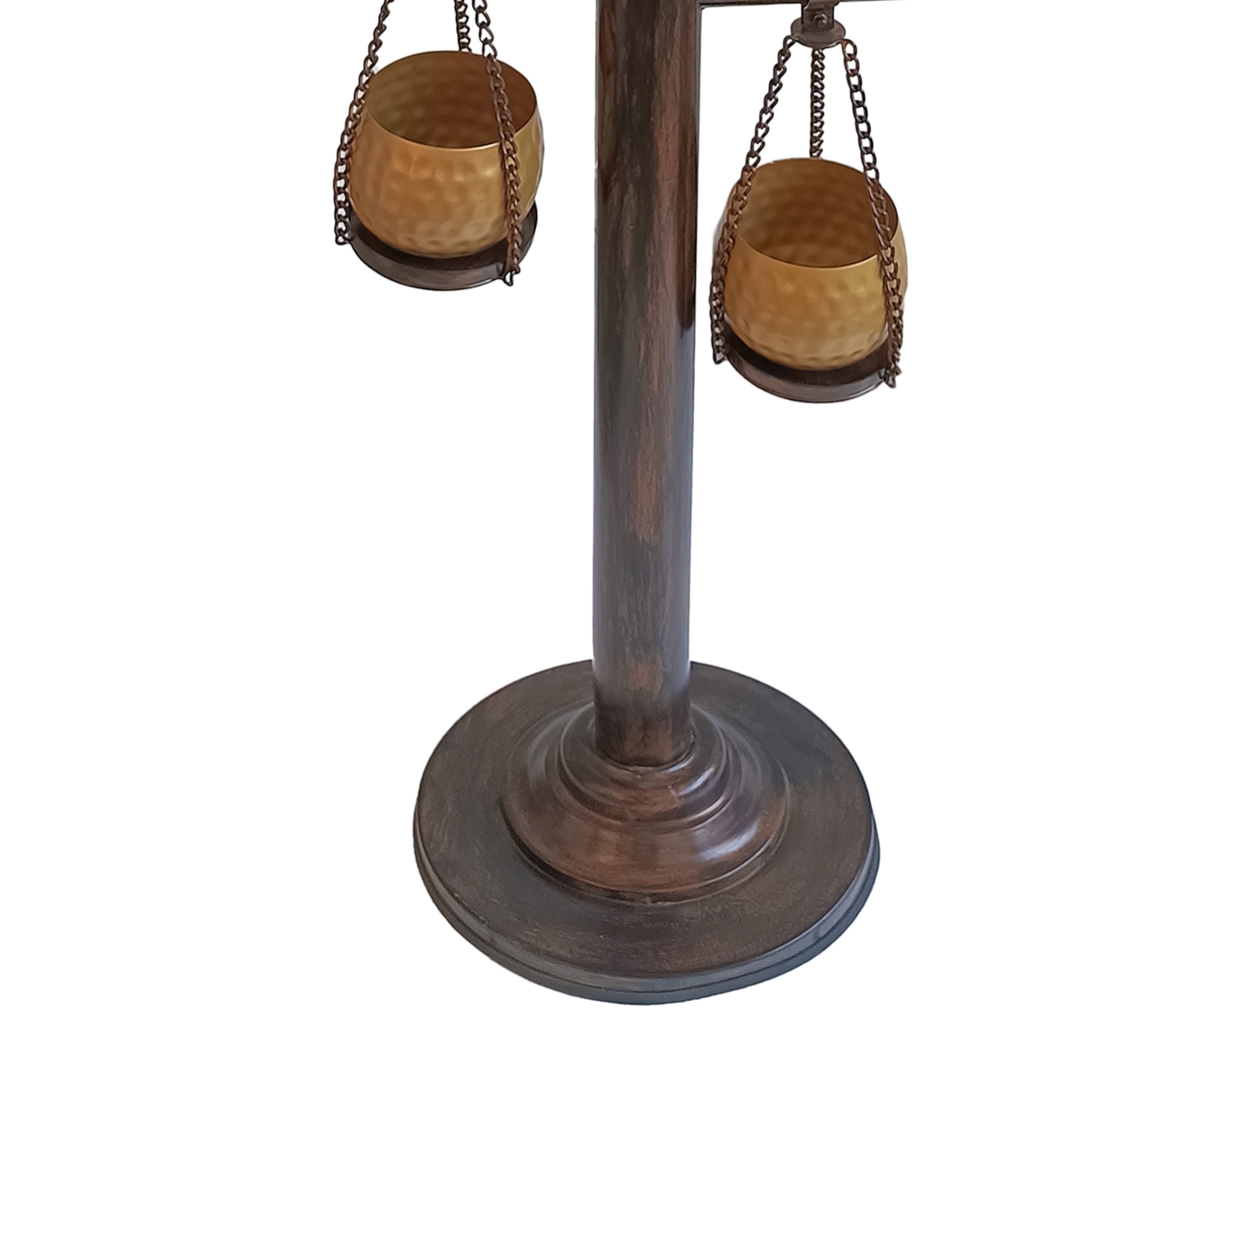 52 Inch Tall Plant Stand With 4 Hanging Pots, Antique Bronze, Gold, Black- Saltoro Sherpi